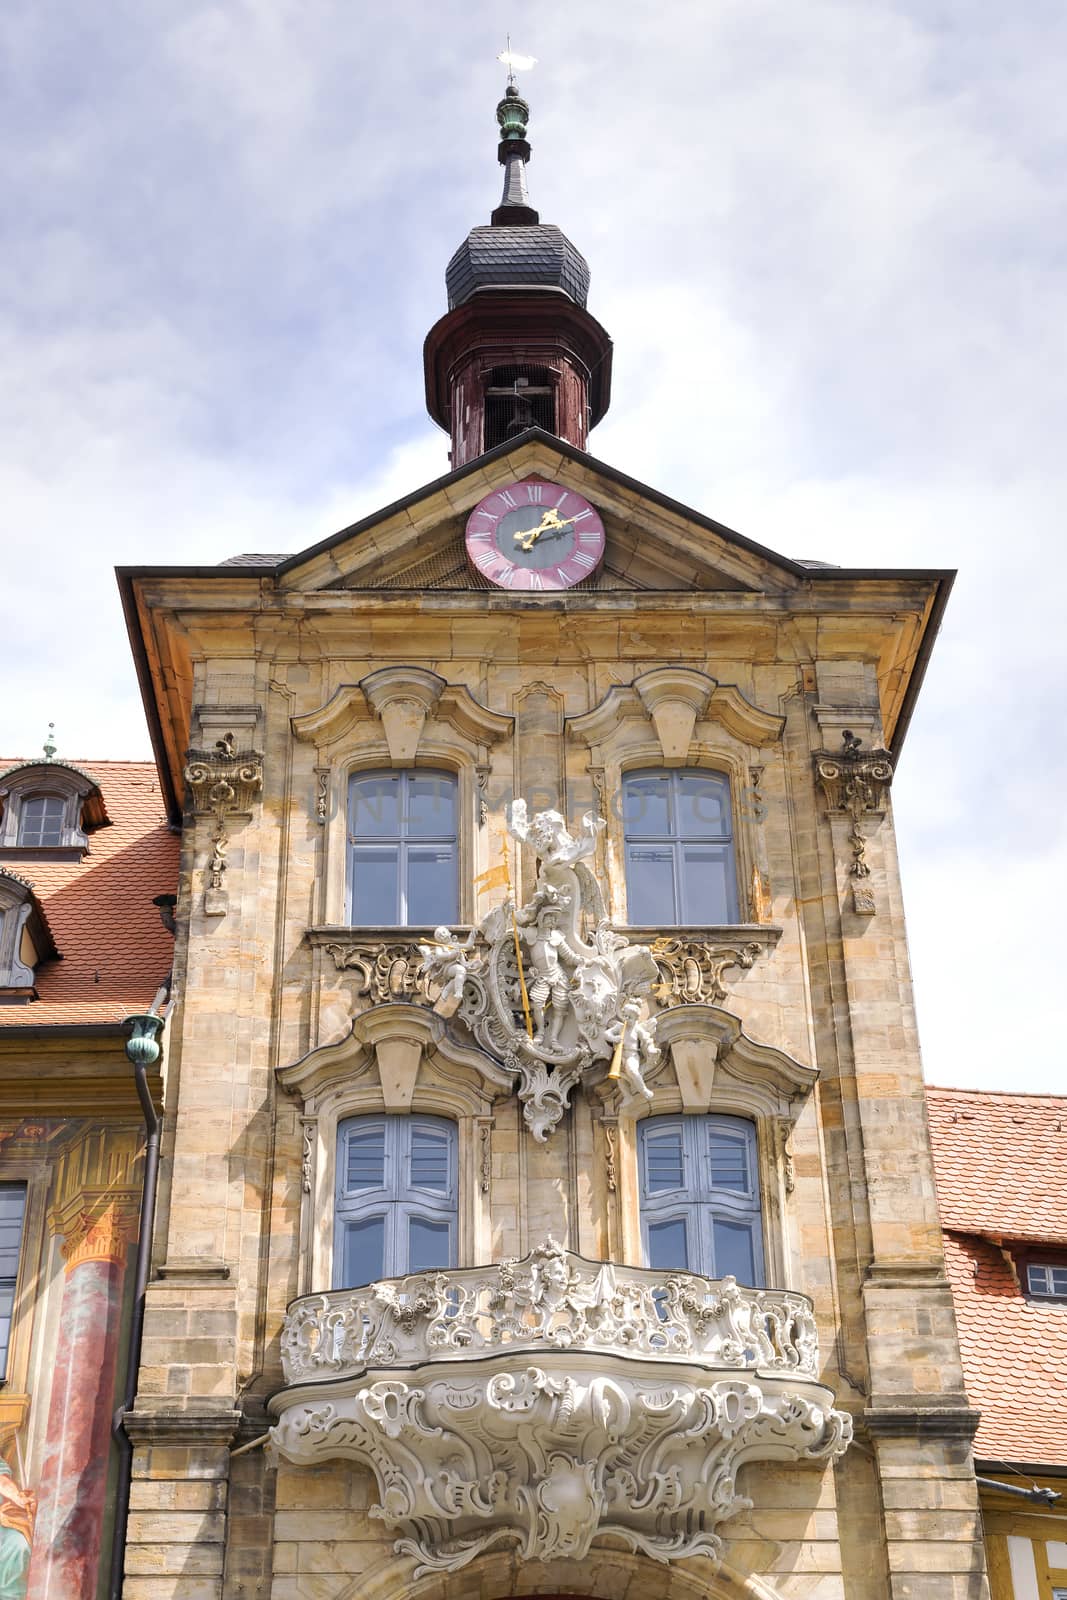 Image of the townhall in Bamberg, Bavaria, Germany